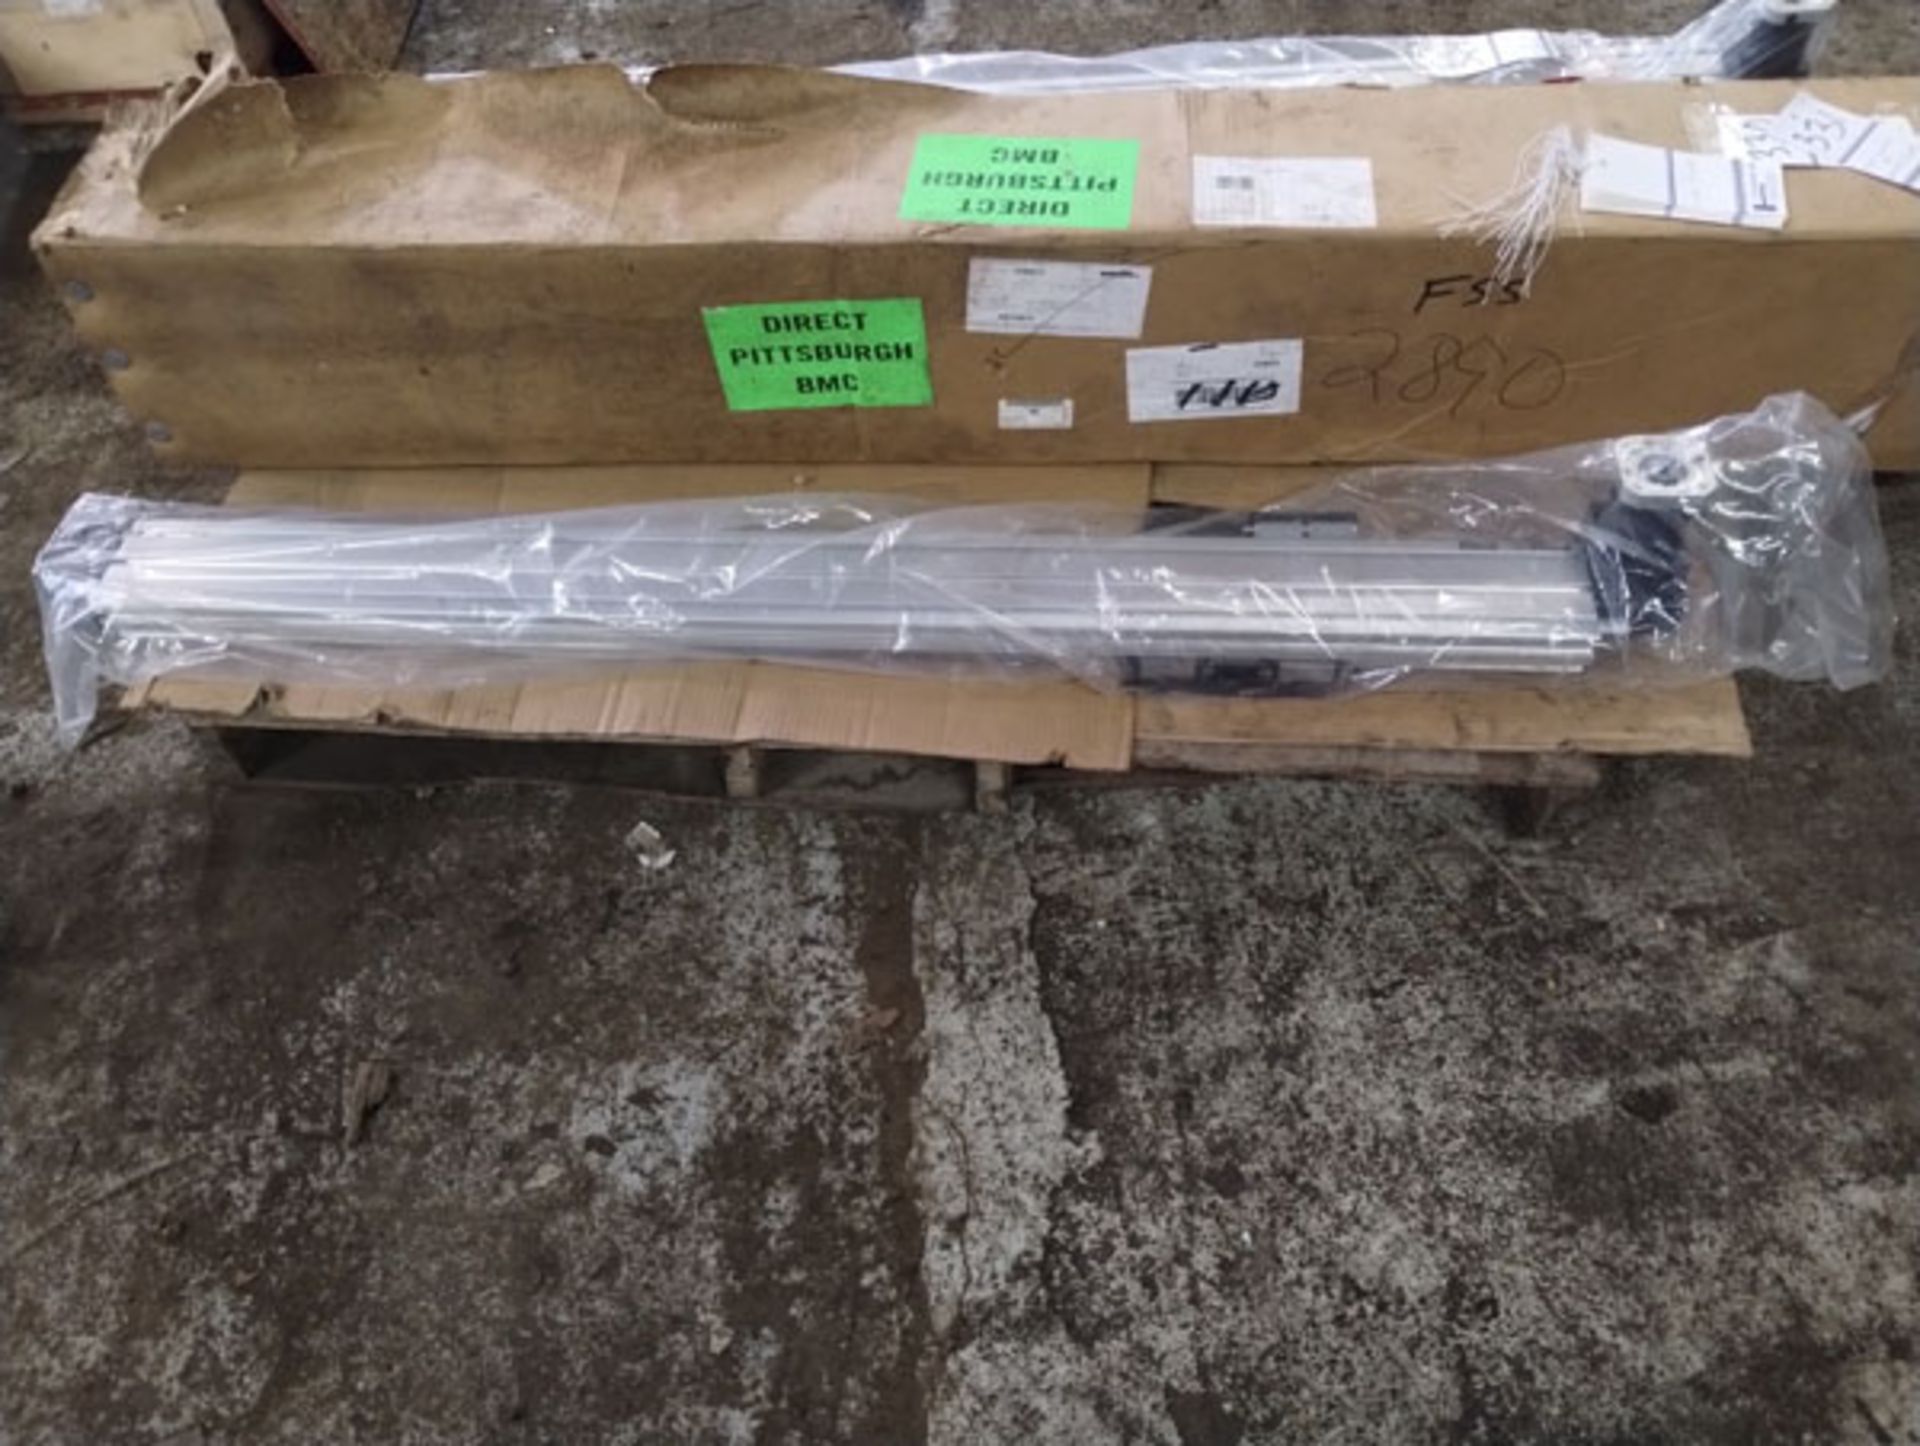 62" LINEAR ACTUATOR PART# 8676A01 -- Lot located at second location: 6800 Union ave. , Cleveland OH